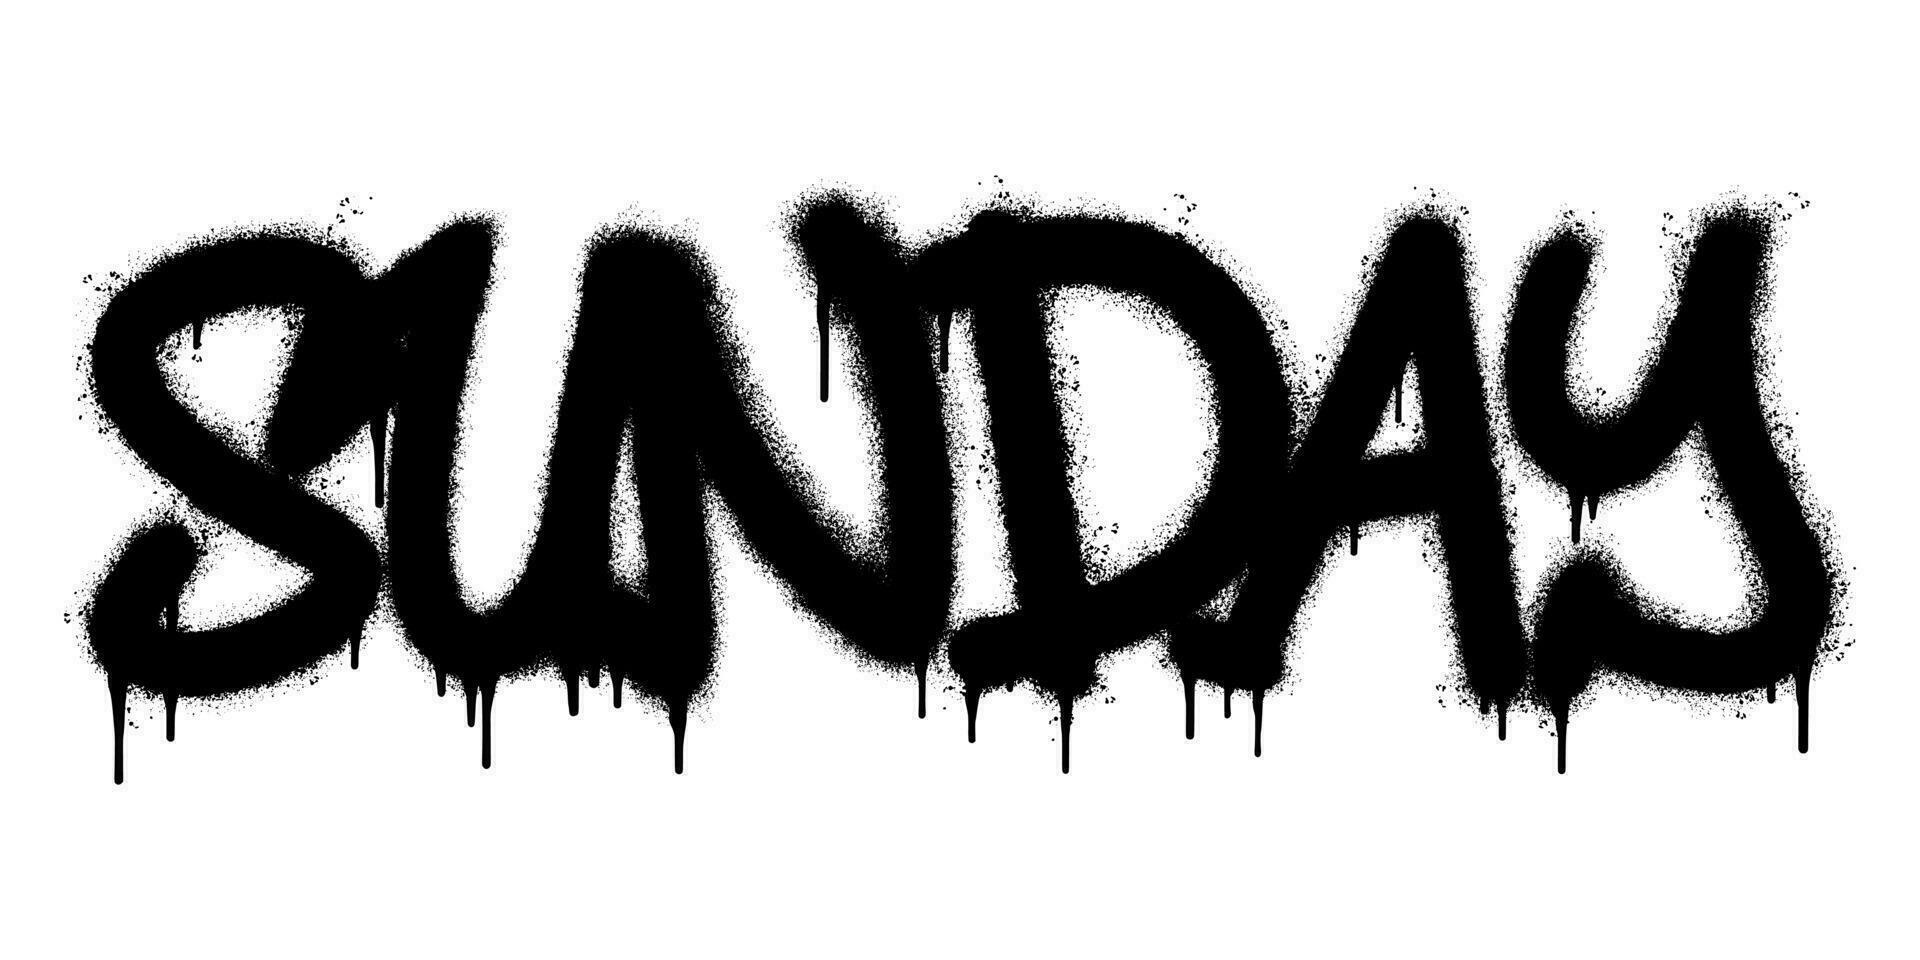 Spray Painted Graffiti Sunday Word Sprayed isolated with a white background. graffiti font Sunday with over spray in black over white. vector